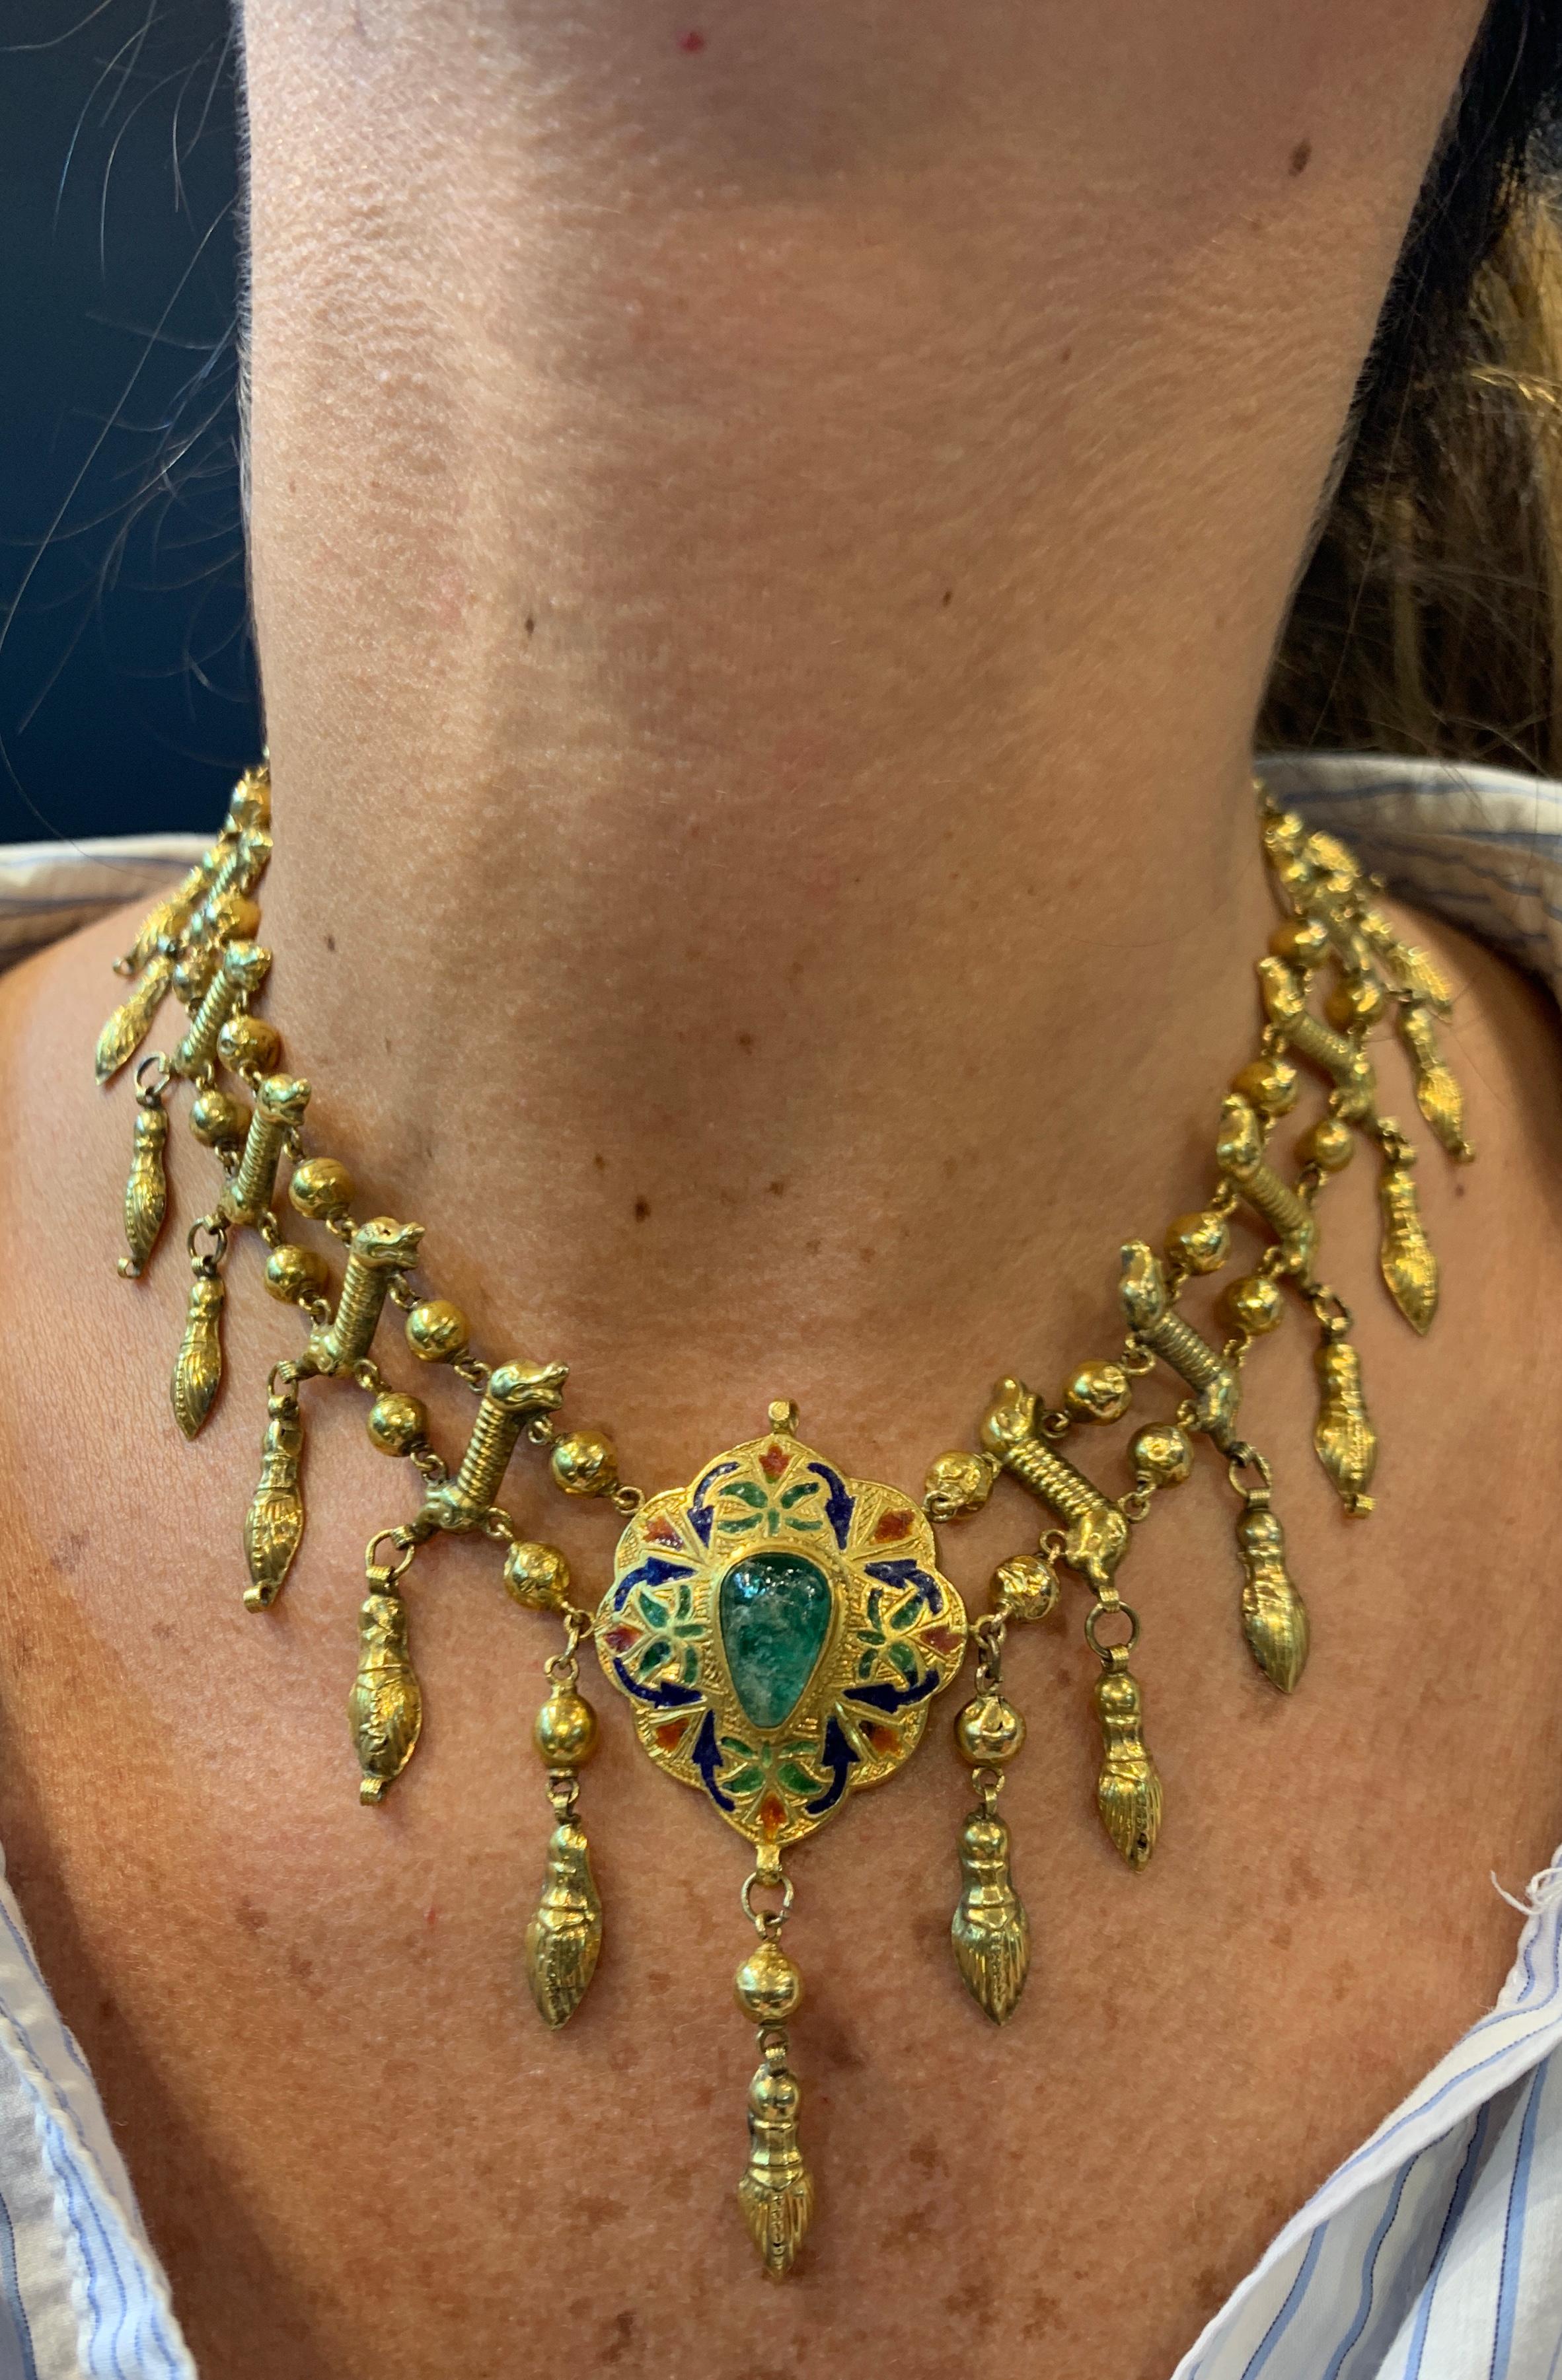 Moroccan Gold Emerald Necklace 
Center Enamel Moroccan Pendant made Circa 1850 set on a later 14k gold necklace 
Reverse set with enamel
Gold Type: 14K Yellow Gold 
Measurements: 14.5